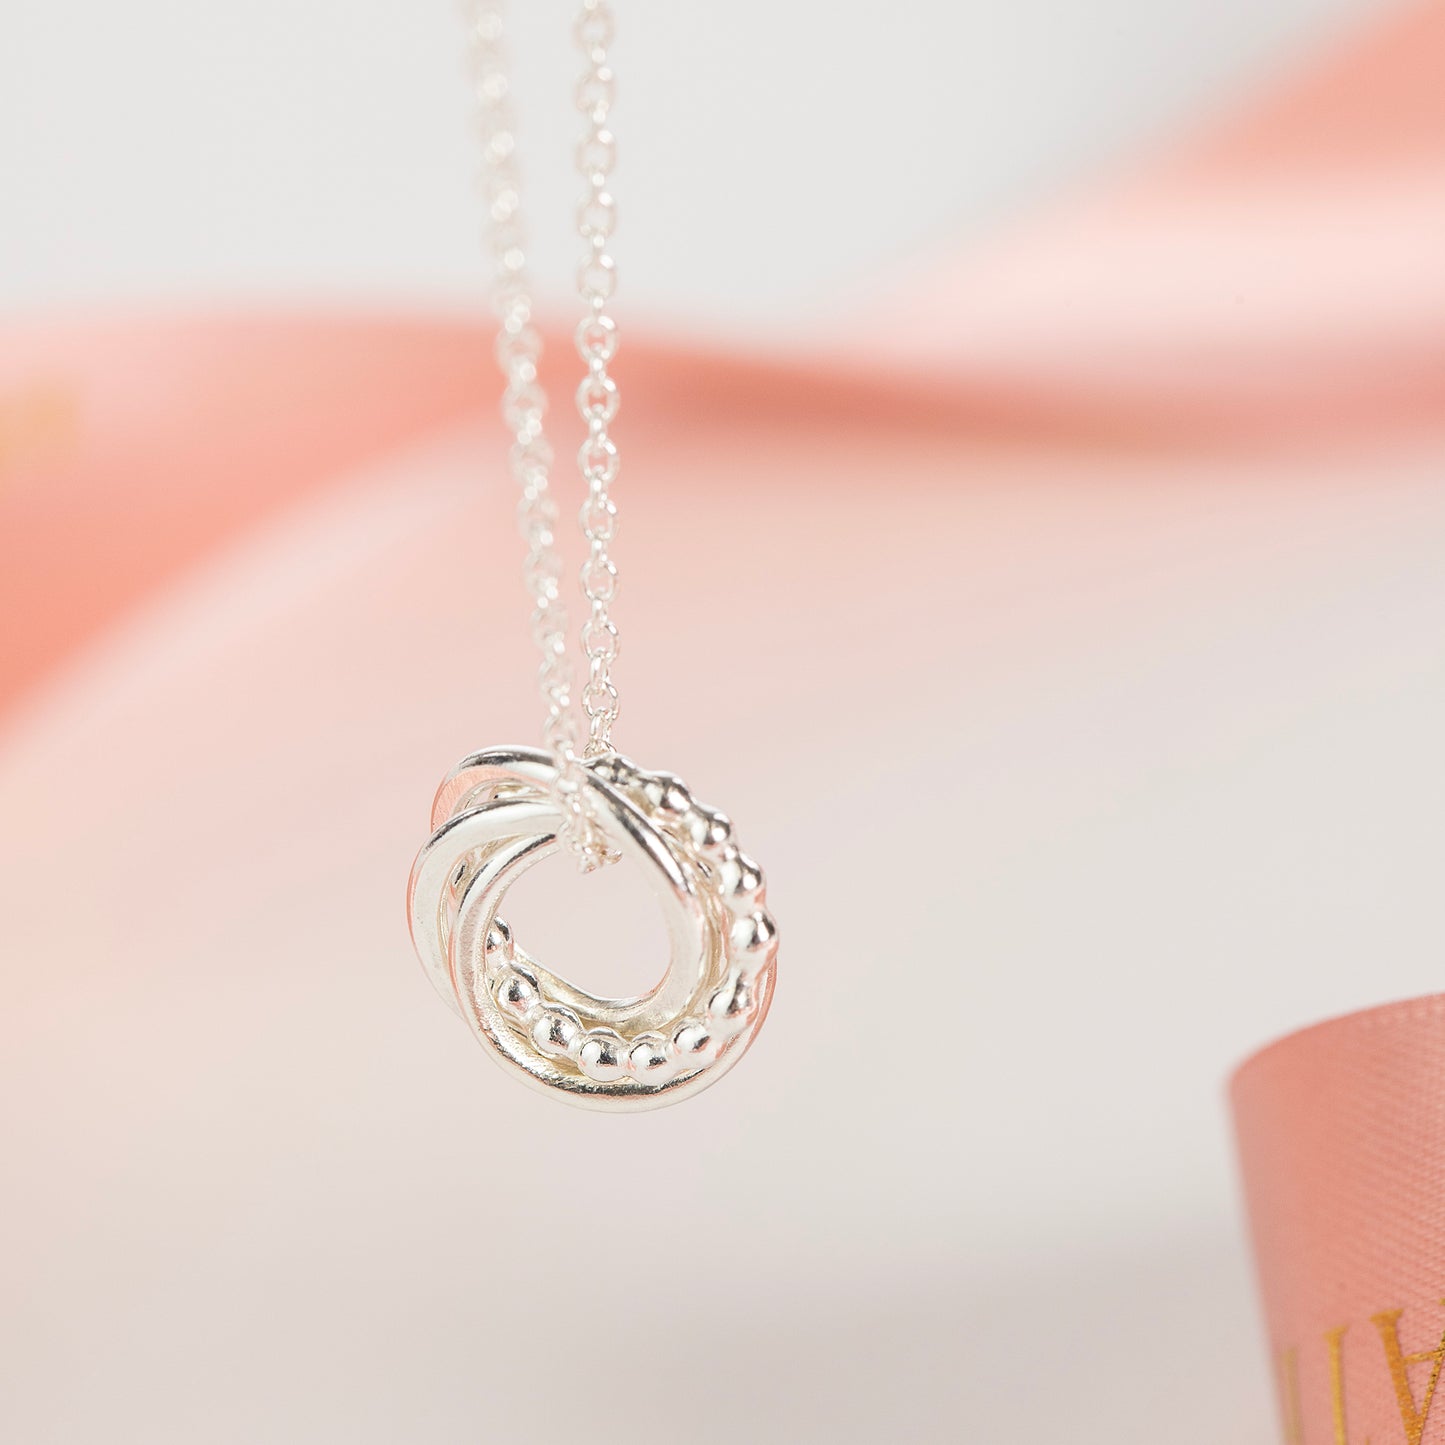 4 Siblings Necklace - Silver Love Knot Necklace